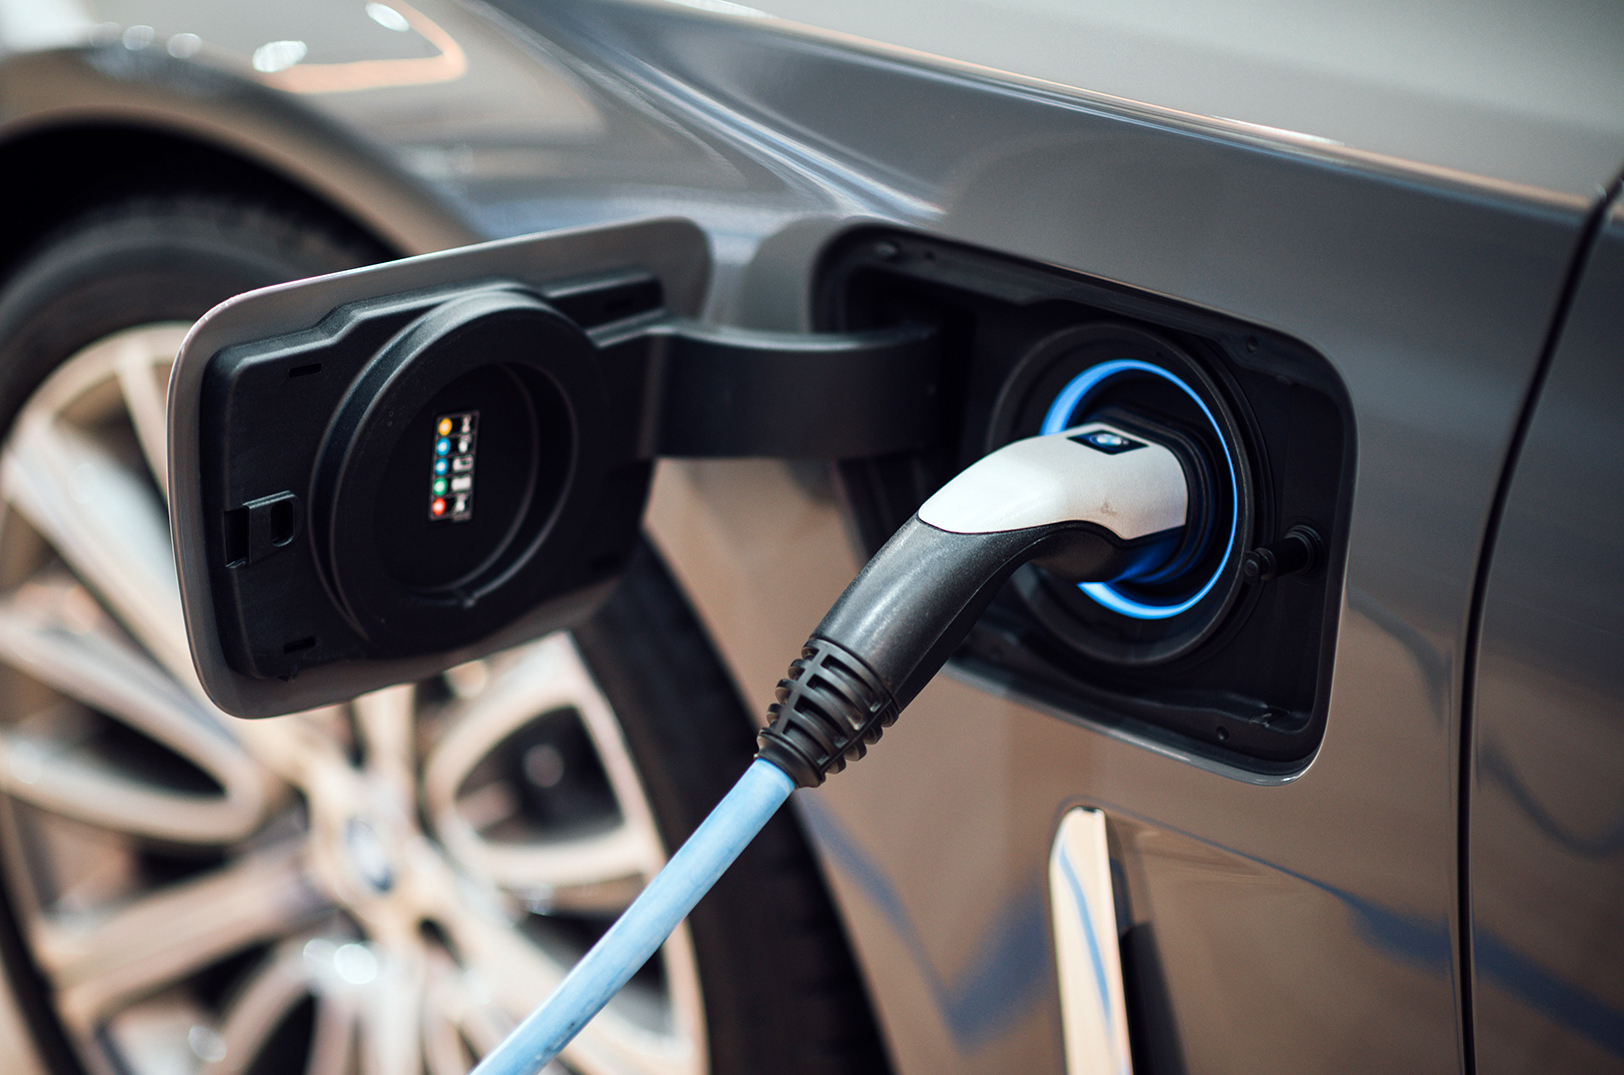 Missouri ranks 7th in electric vehicle use, but access to charging remains a key barrier